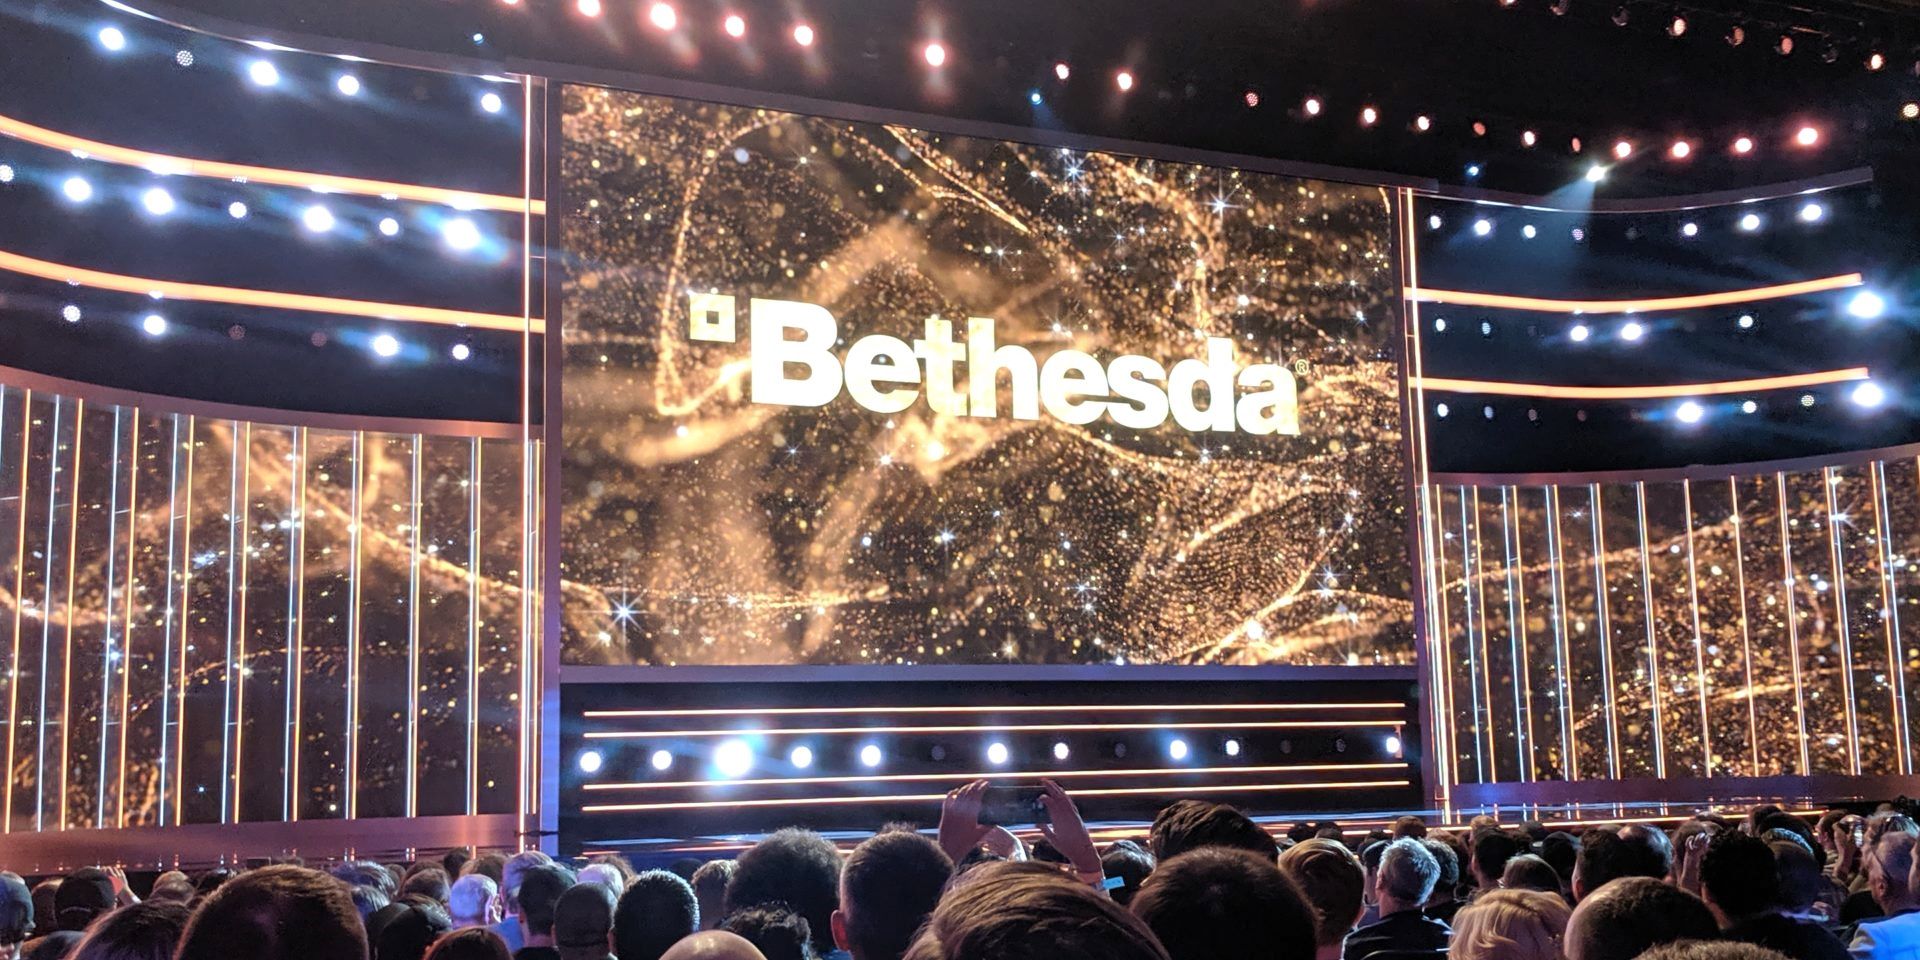 What To Expect From Bethesda At Microsoft's E3 Conference